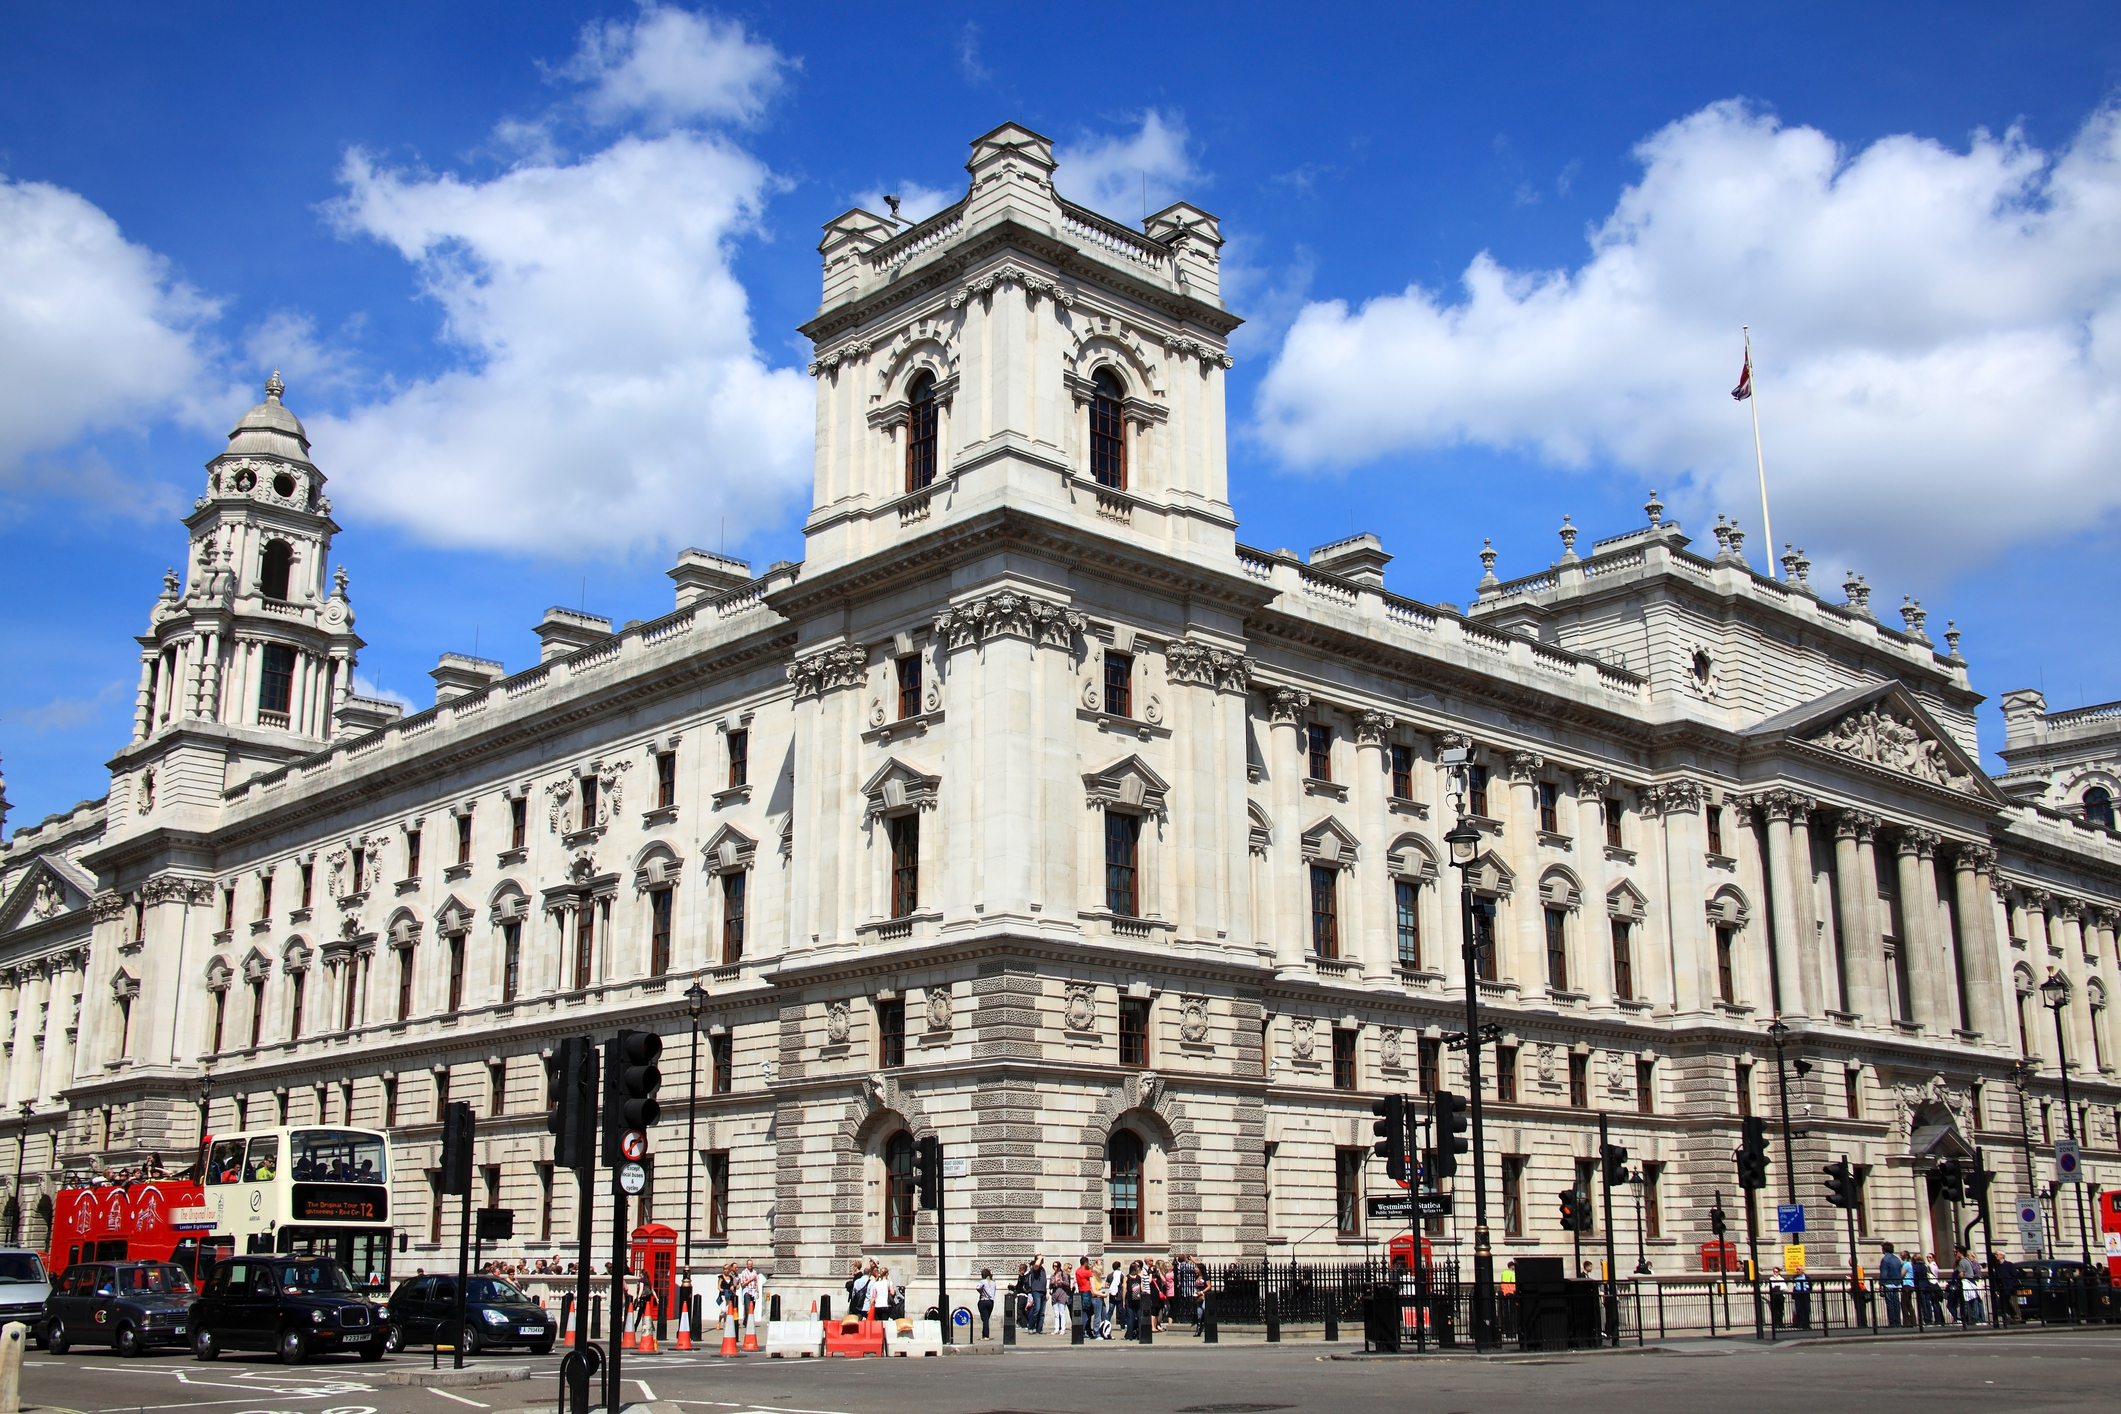 HMRC Strike Action: 15 March 2023 (Spring Budget Day)